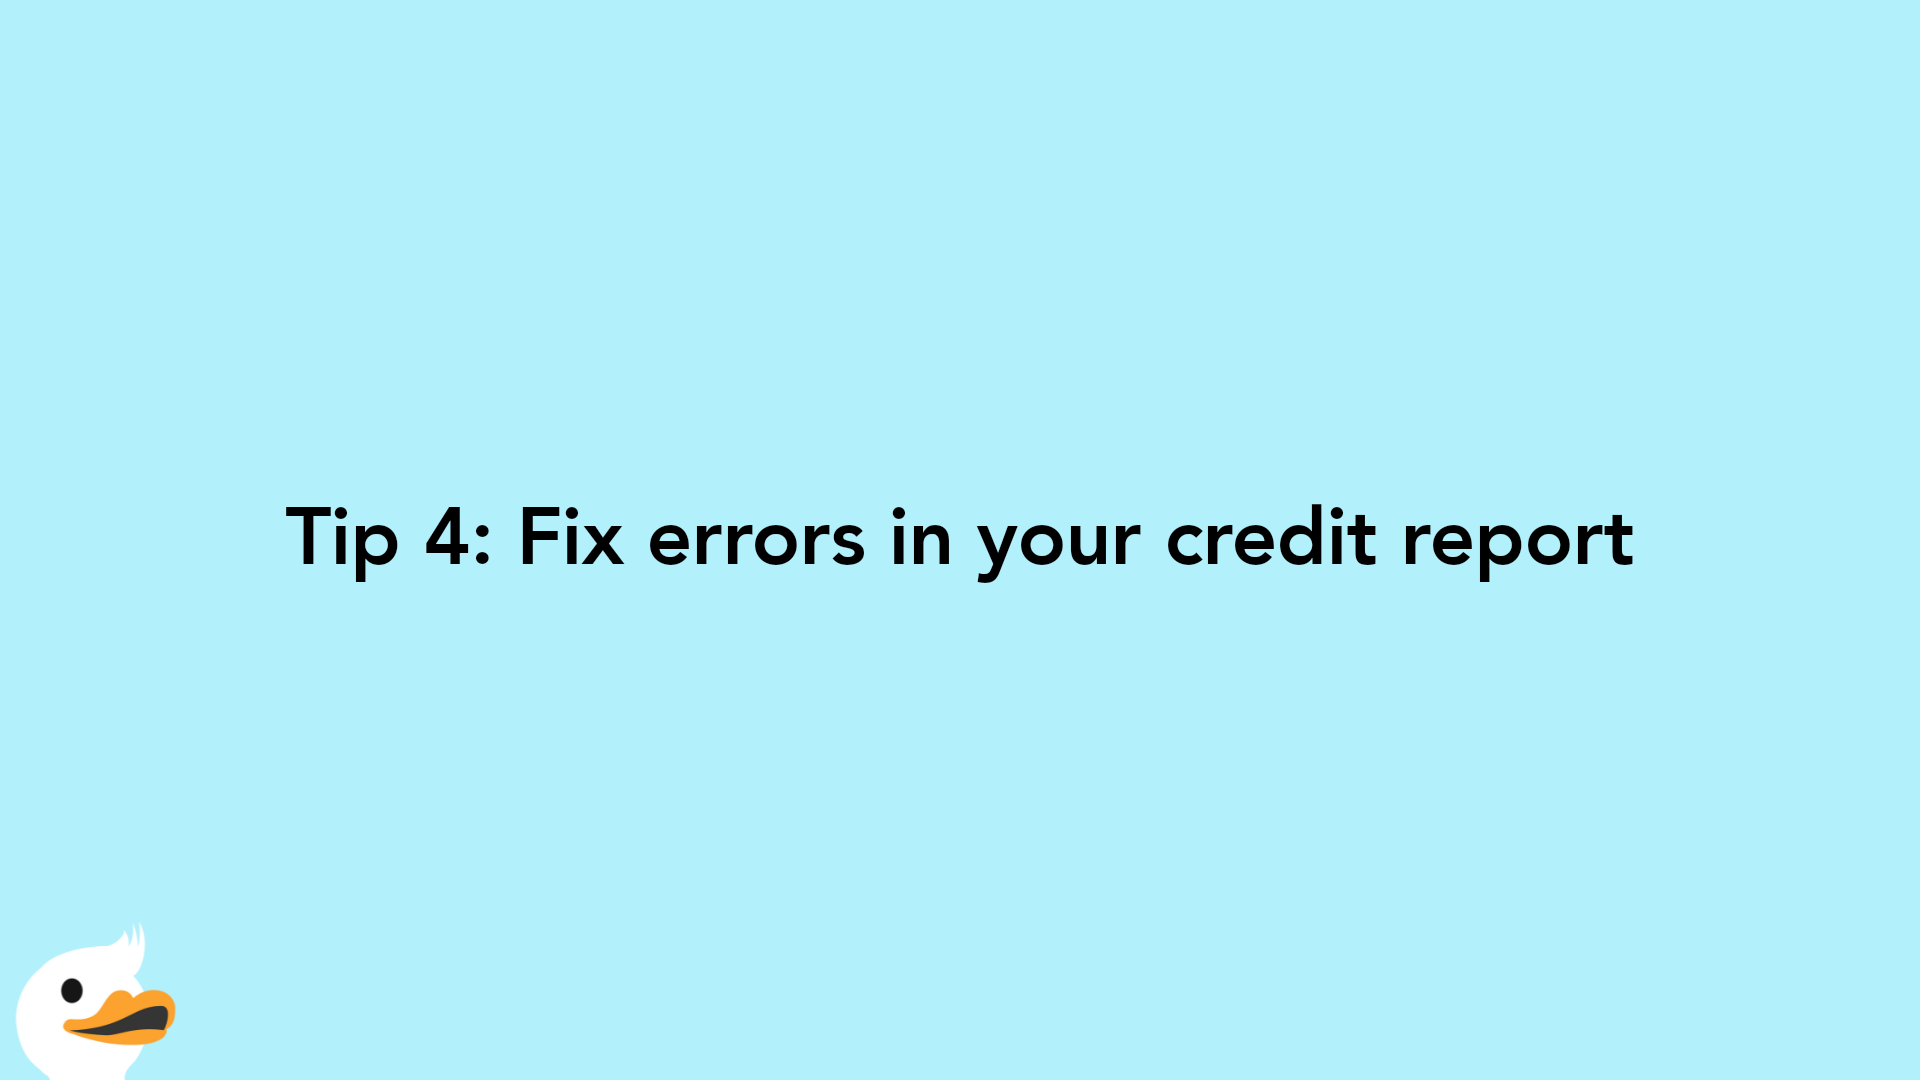 Tip 4: Fix errors in your credit report